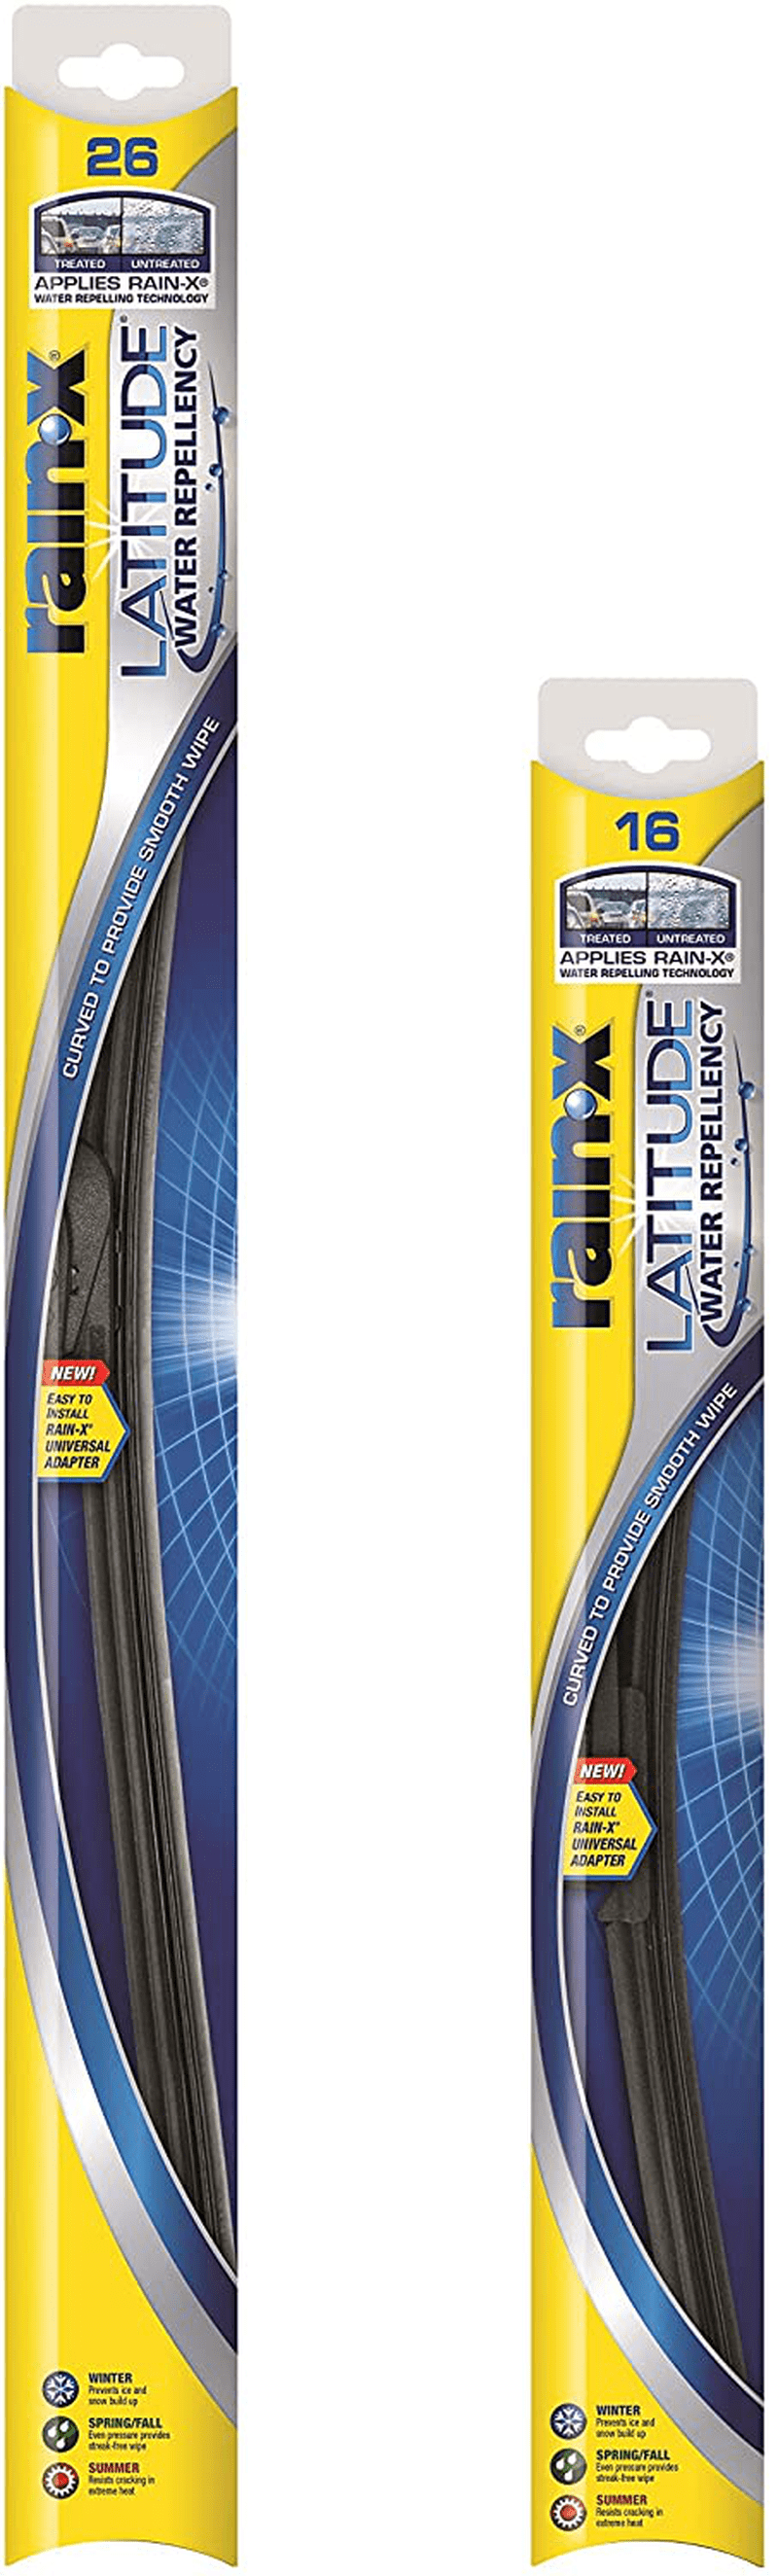 Rain-X - 810163 Latitude Water Repellency Wiper Blade Combo Pack 26" and 16" Vehicles & Parts > Vehicle Parts & Accessories > Motor Vehicle Parts Rain-X 2-pack 26 /16 in combo 